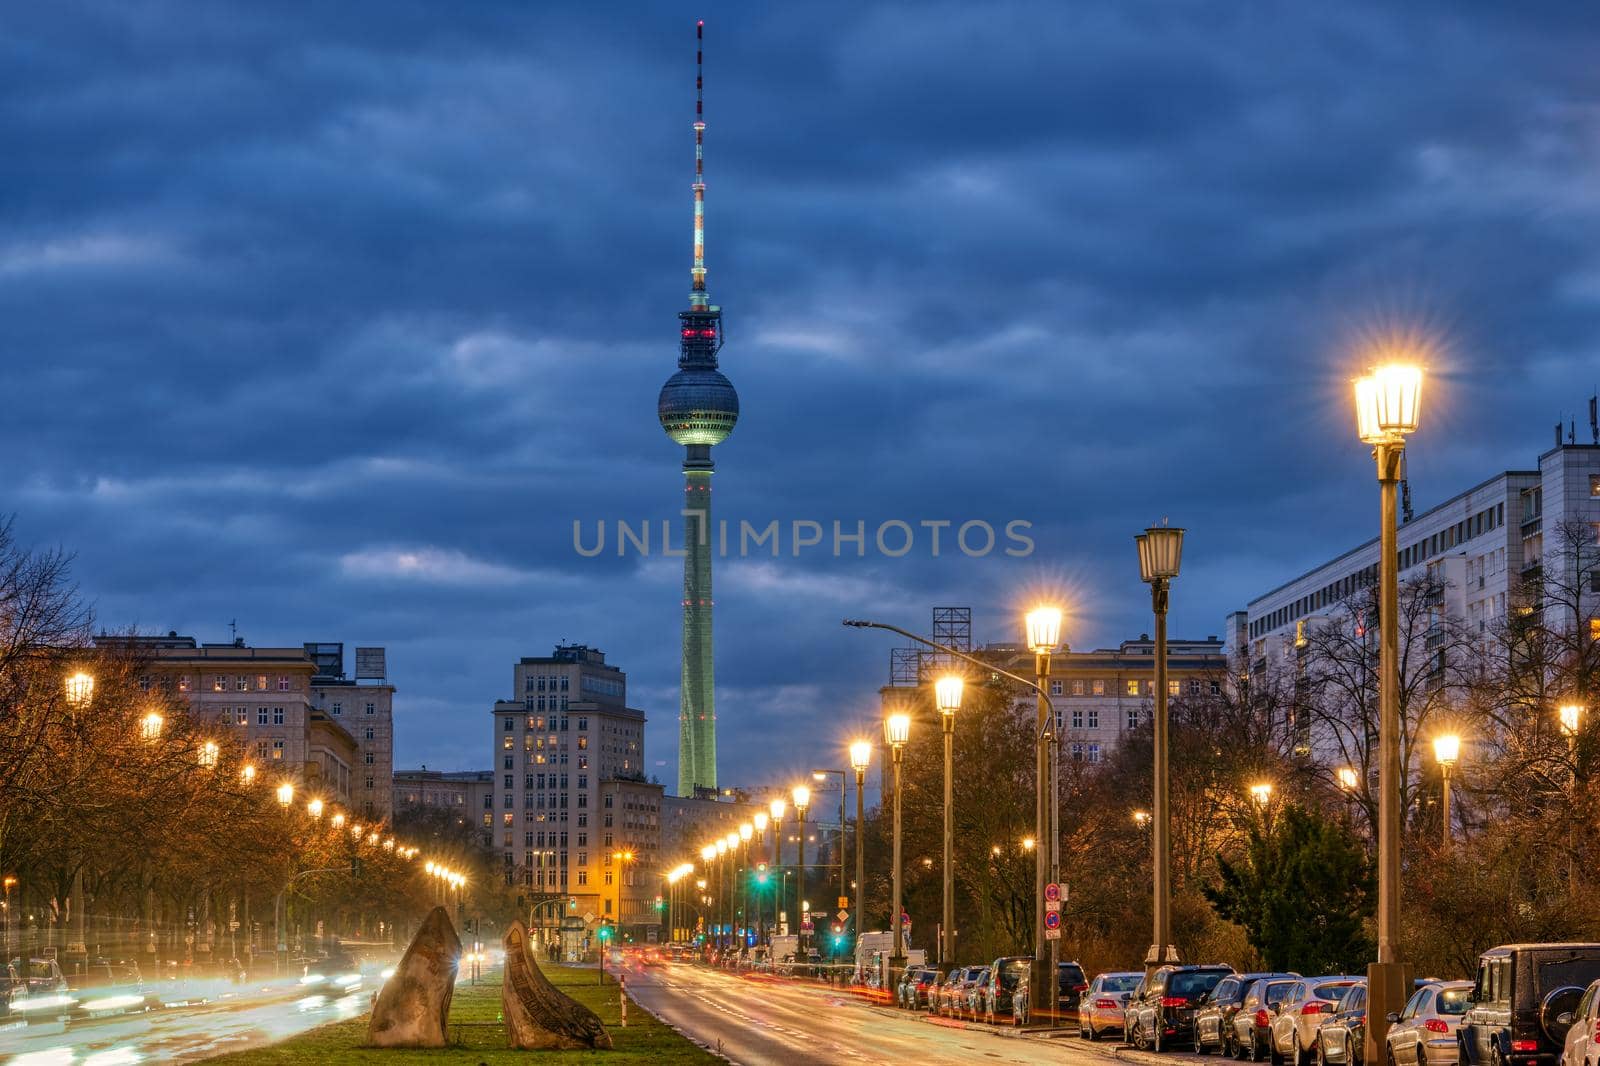 The famous TV Tower of Berlin with one of the big avenues at night